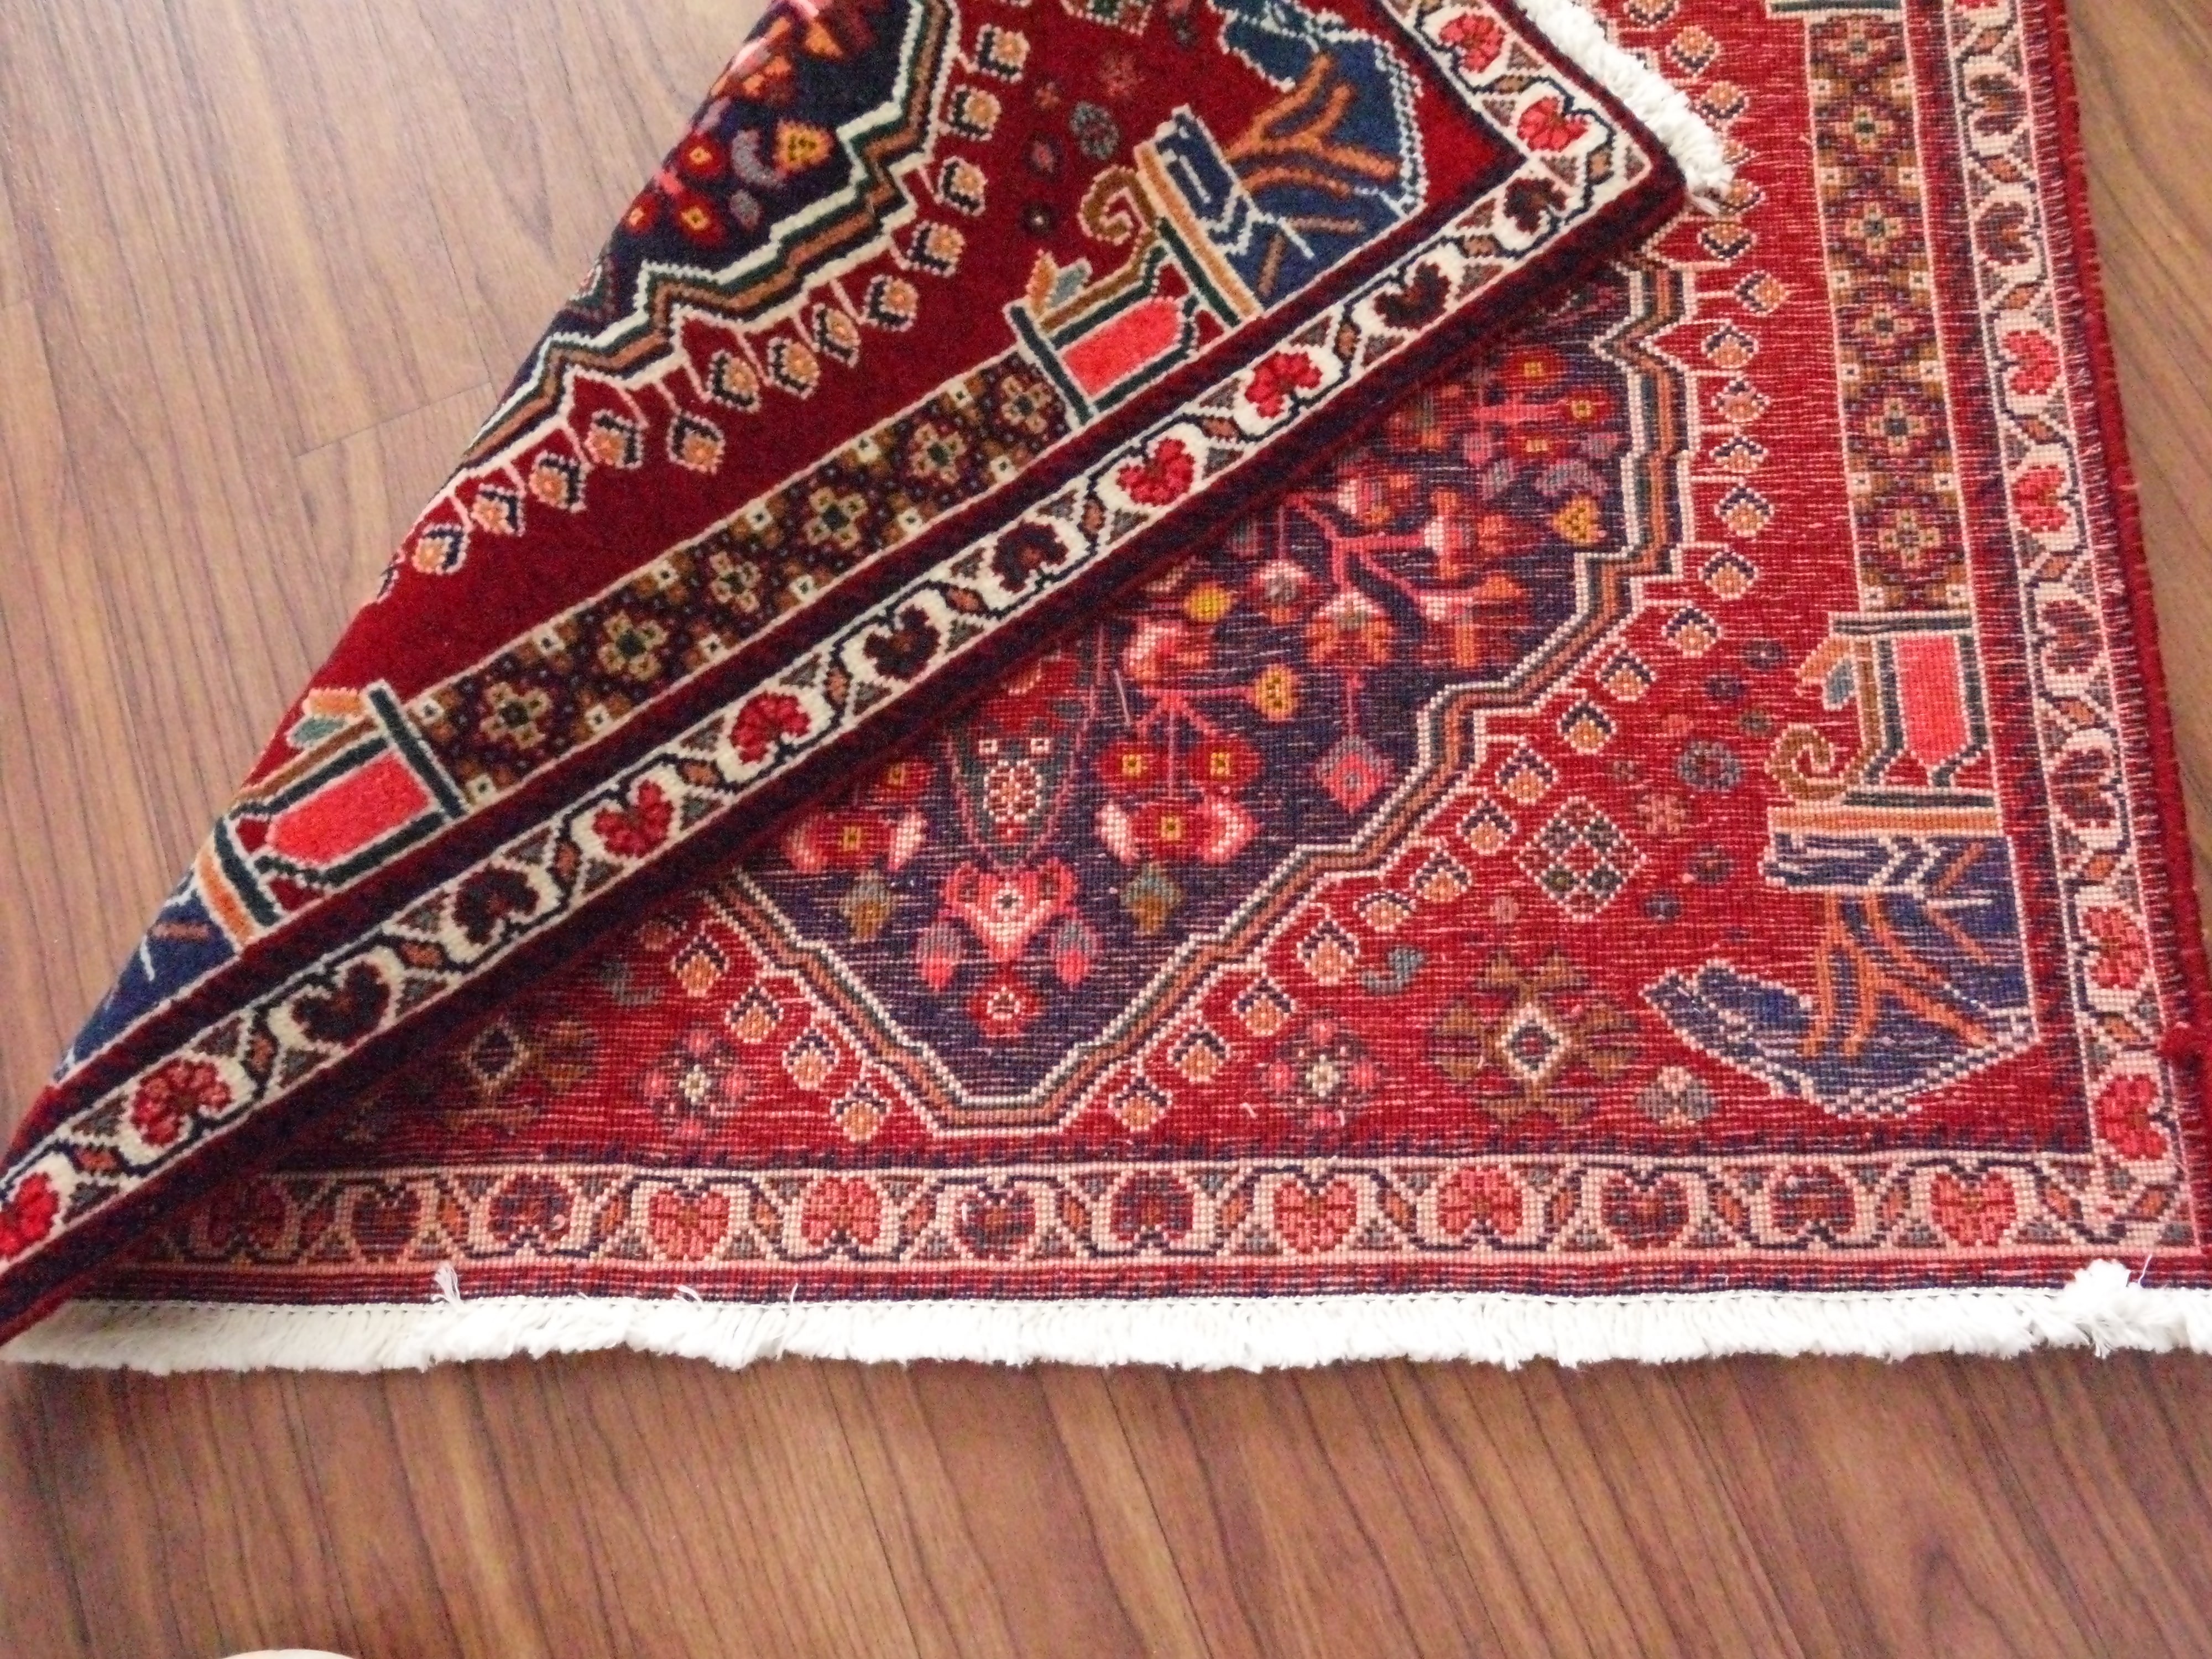 Is Your Rug Handmade or Machine-made?